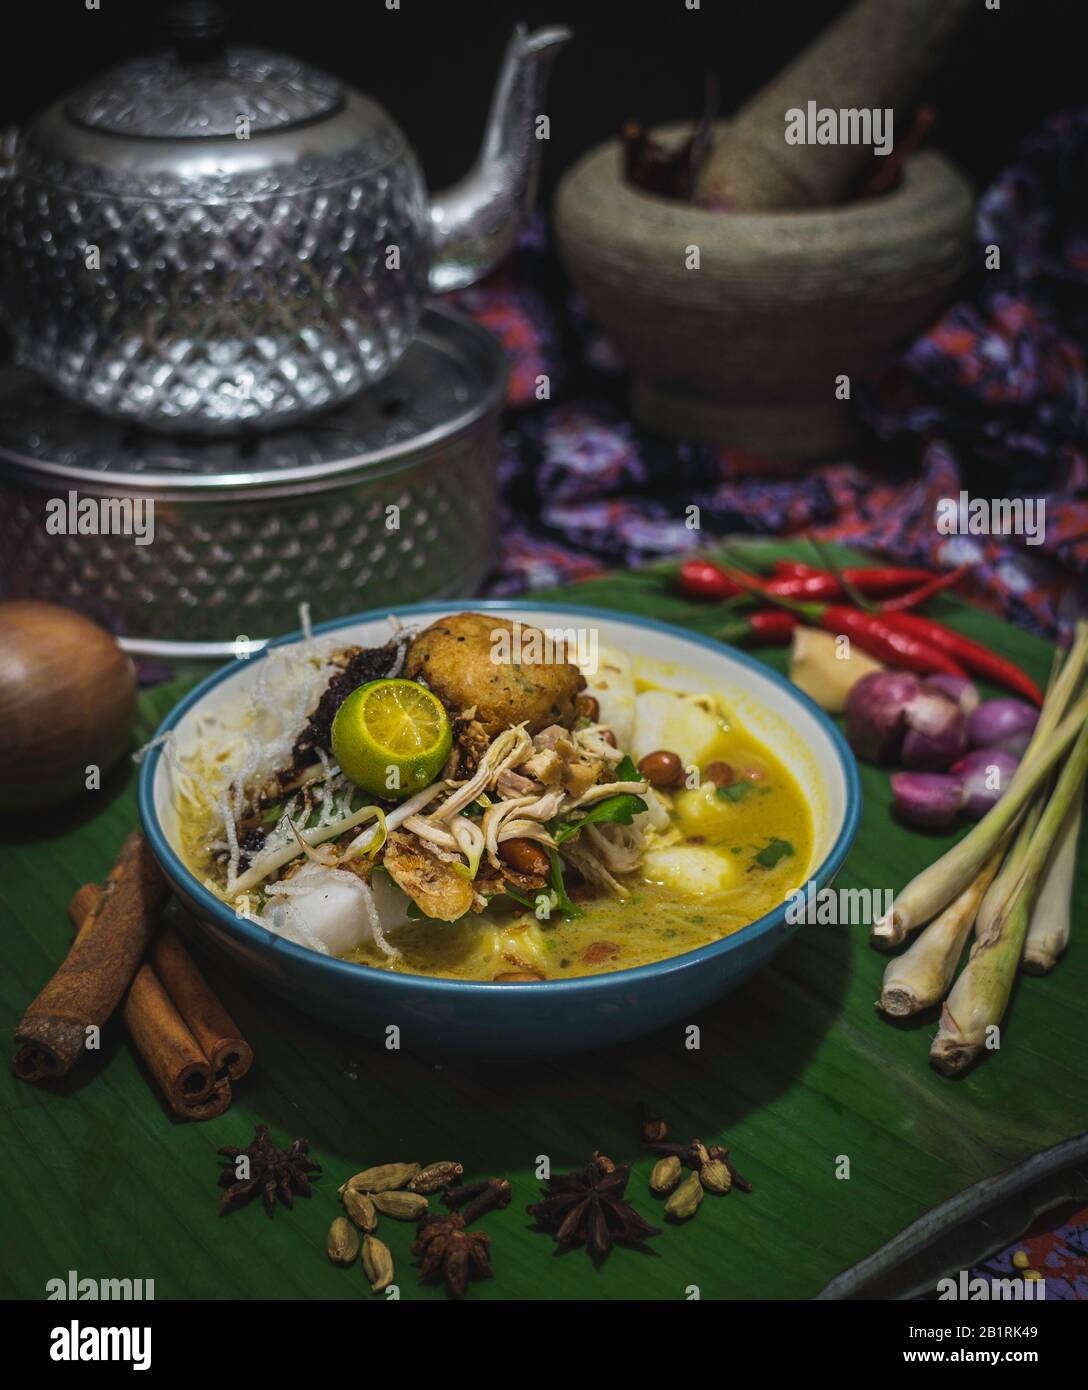 Bowl of traditional Malaysian soto or broth with chicken, noodles and vegetables garnished with lime surrounded by ingredients Stock Photo